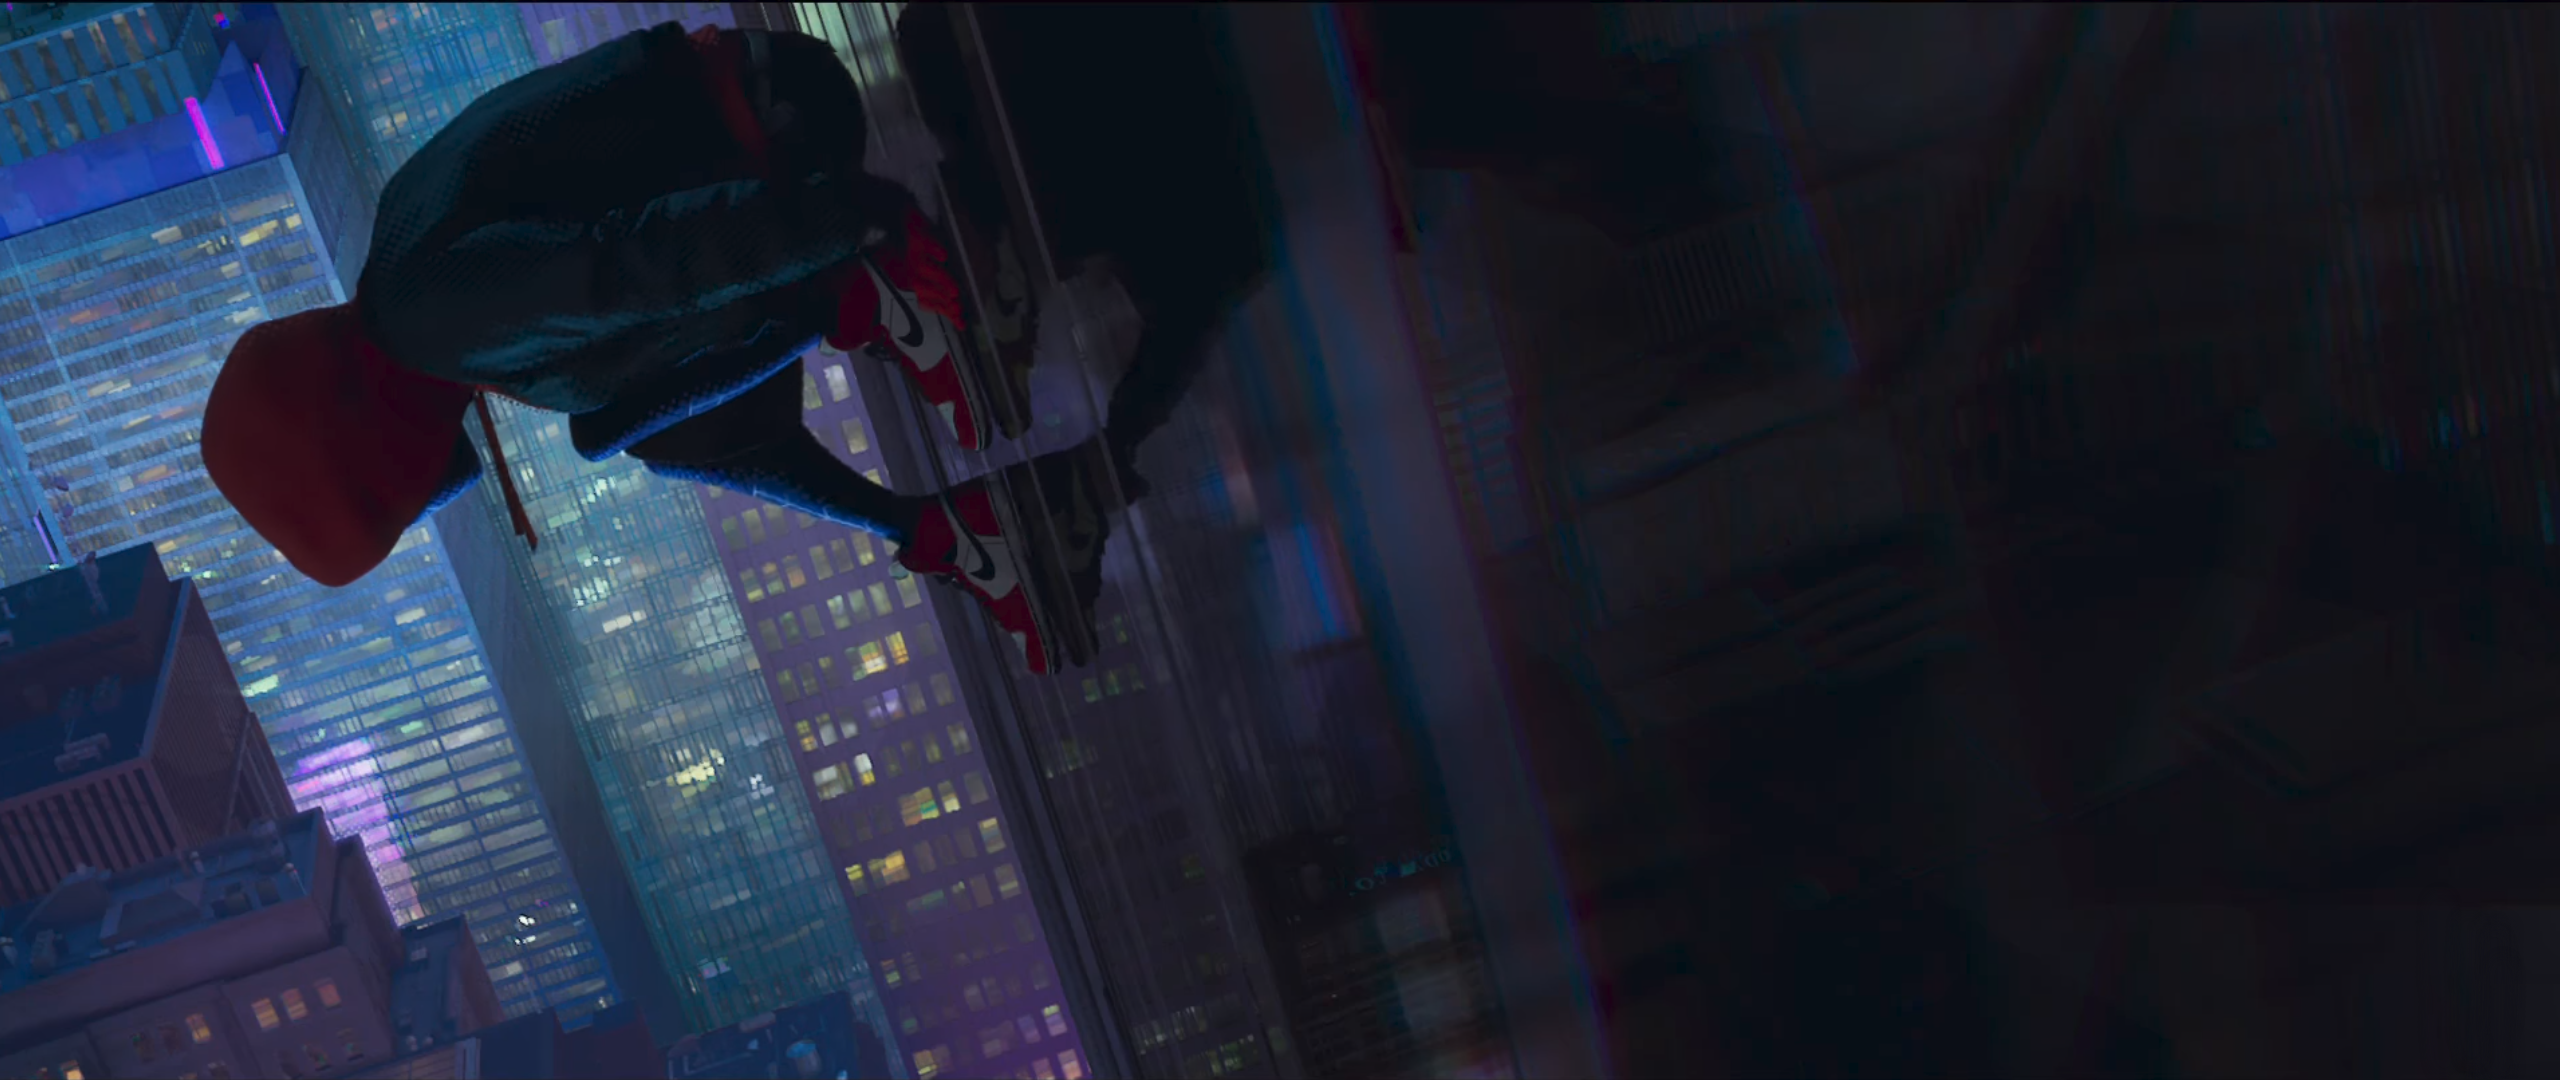 Spiderman: Into the Spiderverse Wallpaper. Spider